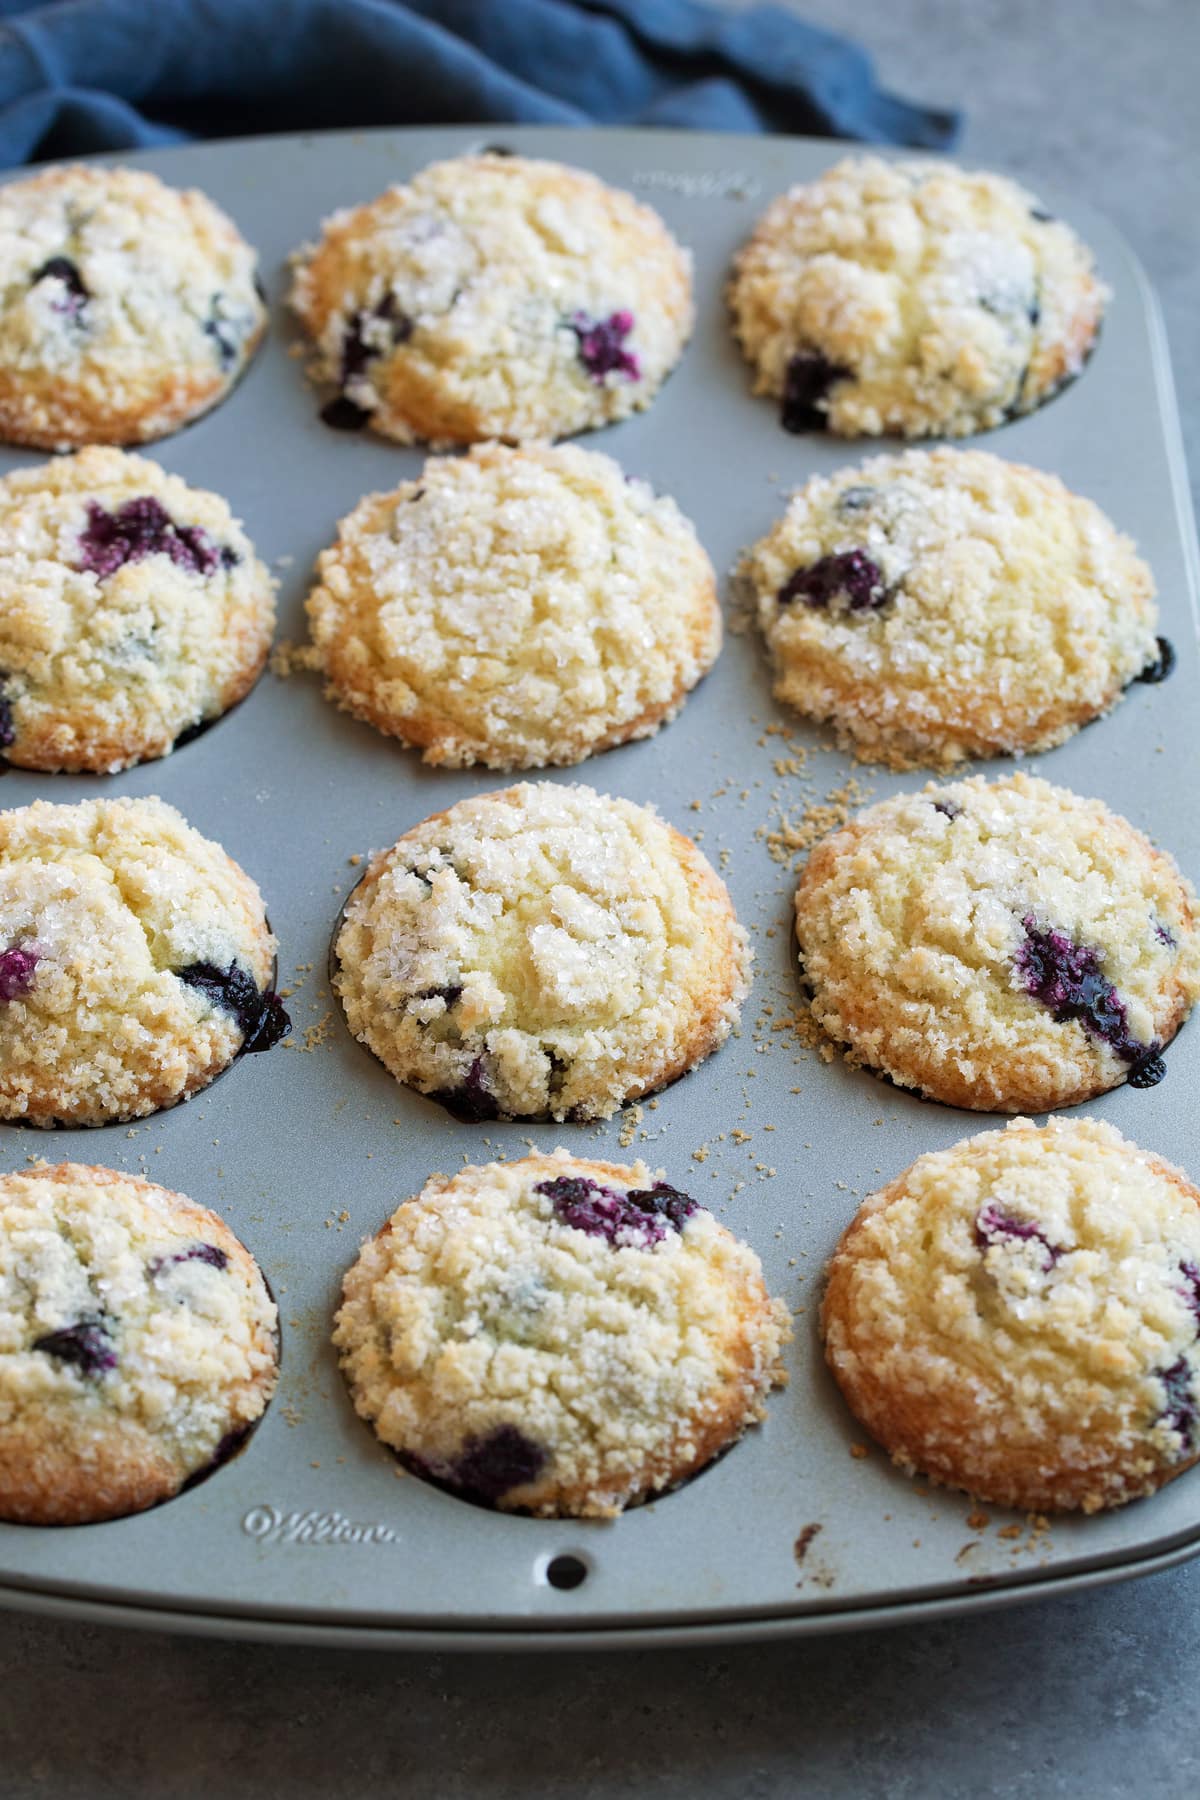 Blueberry muffins with crumb topping after baking, shown in a 12 hole muffin pan.